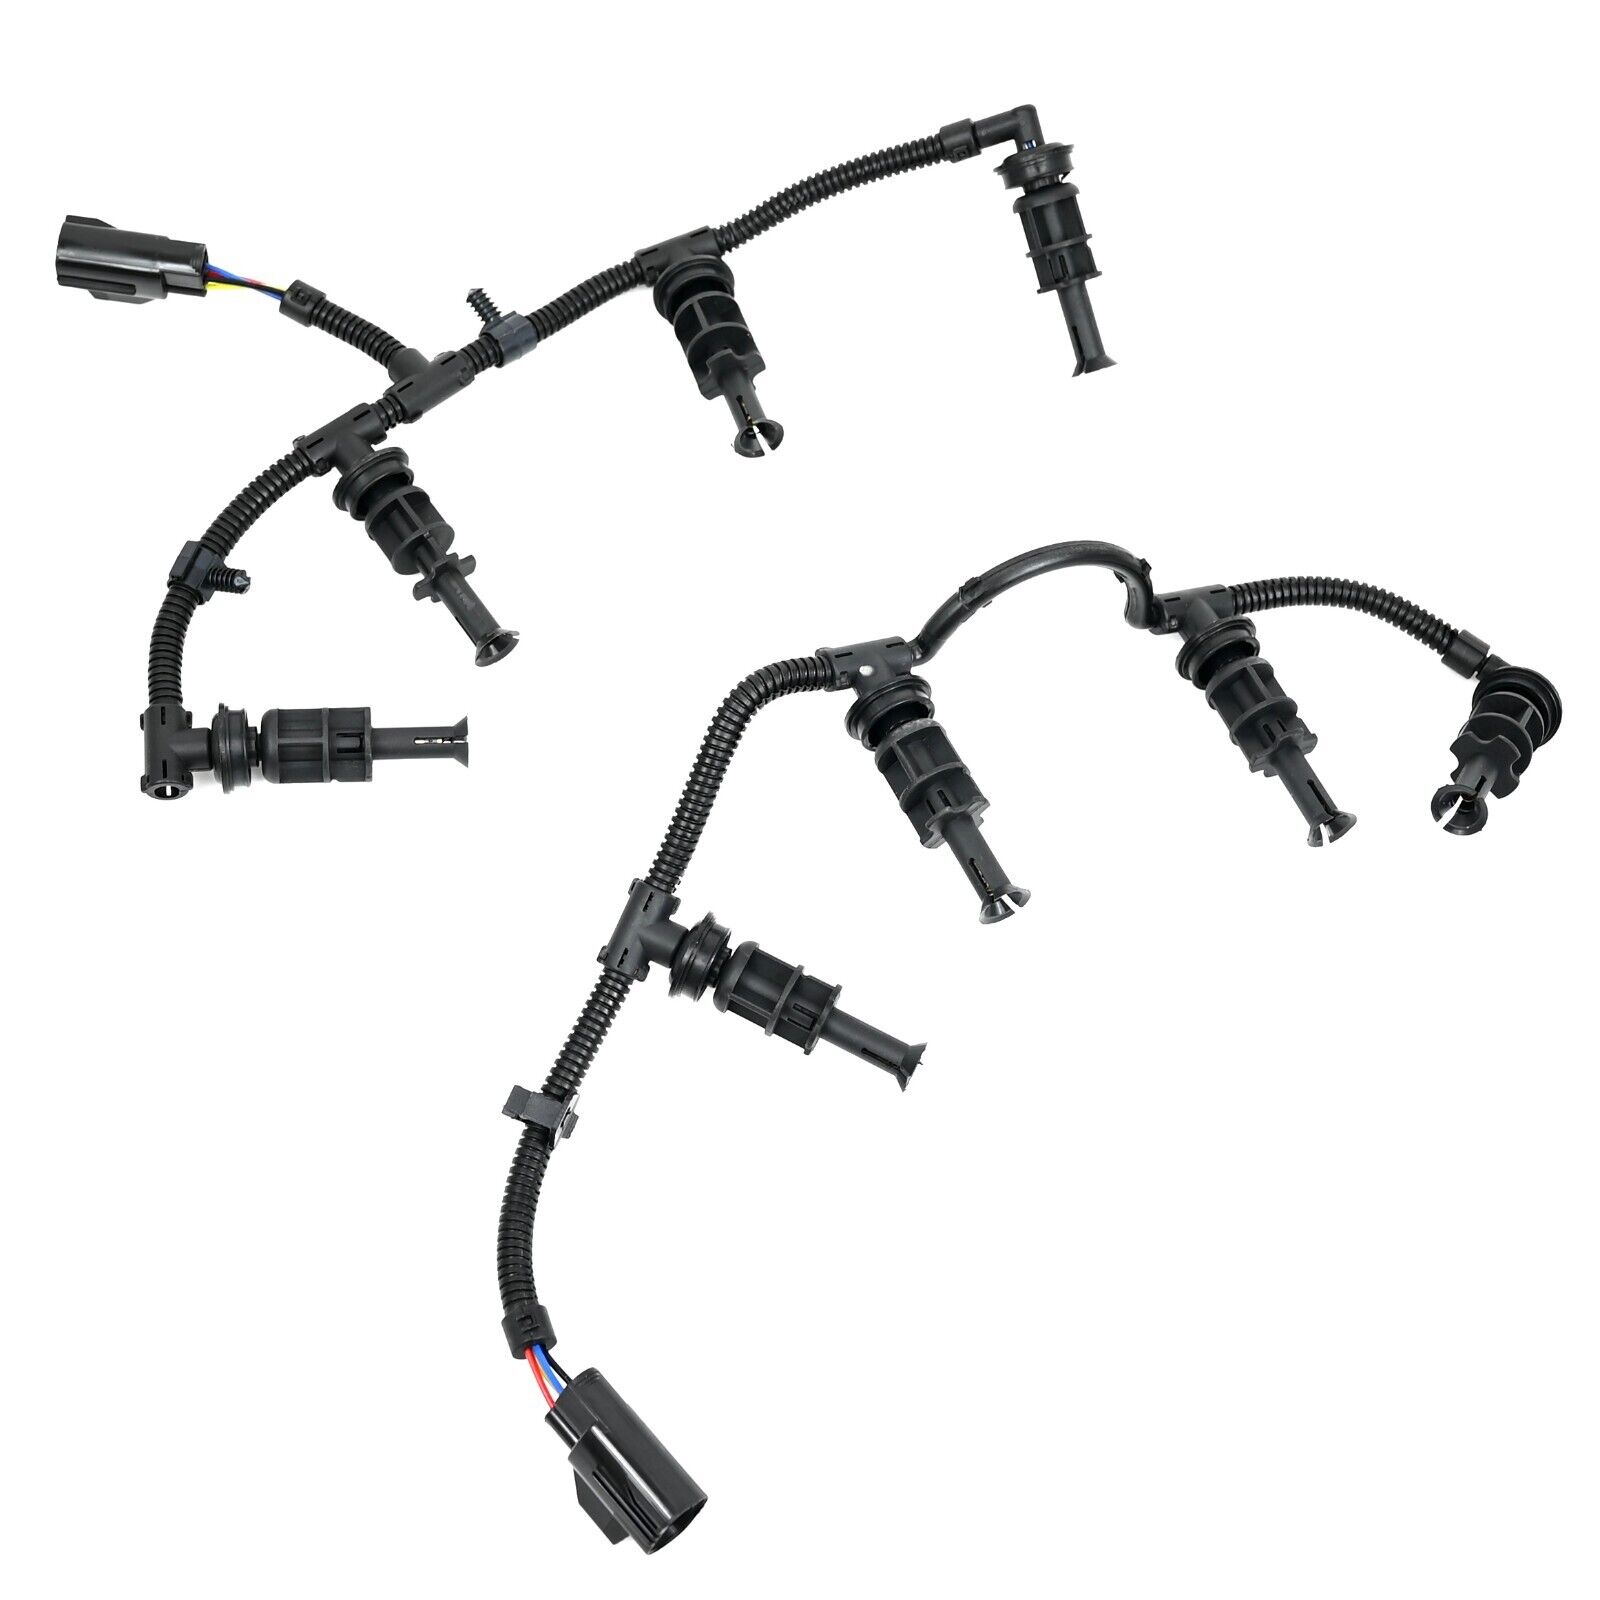 6.4L Powerstroke Glow Plug Harness 08-10 Ford Diesel 6.4 Right and Left 